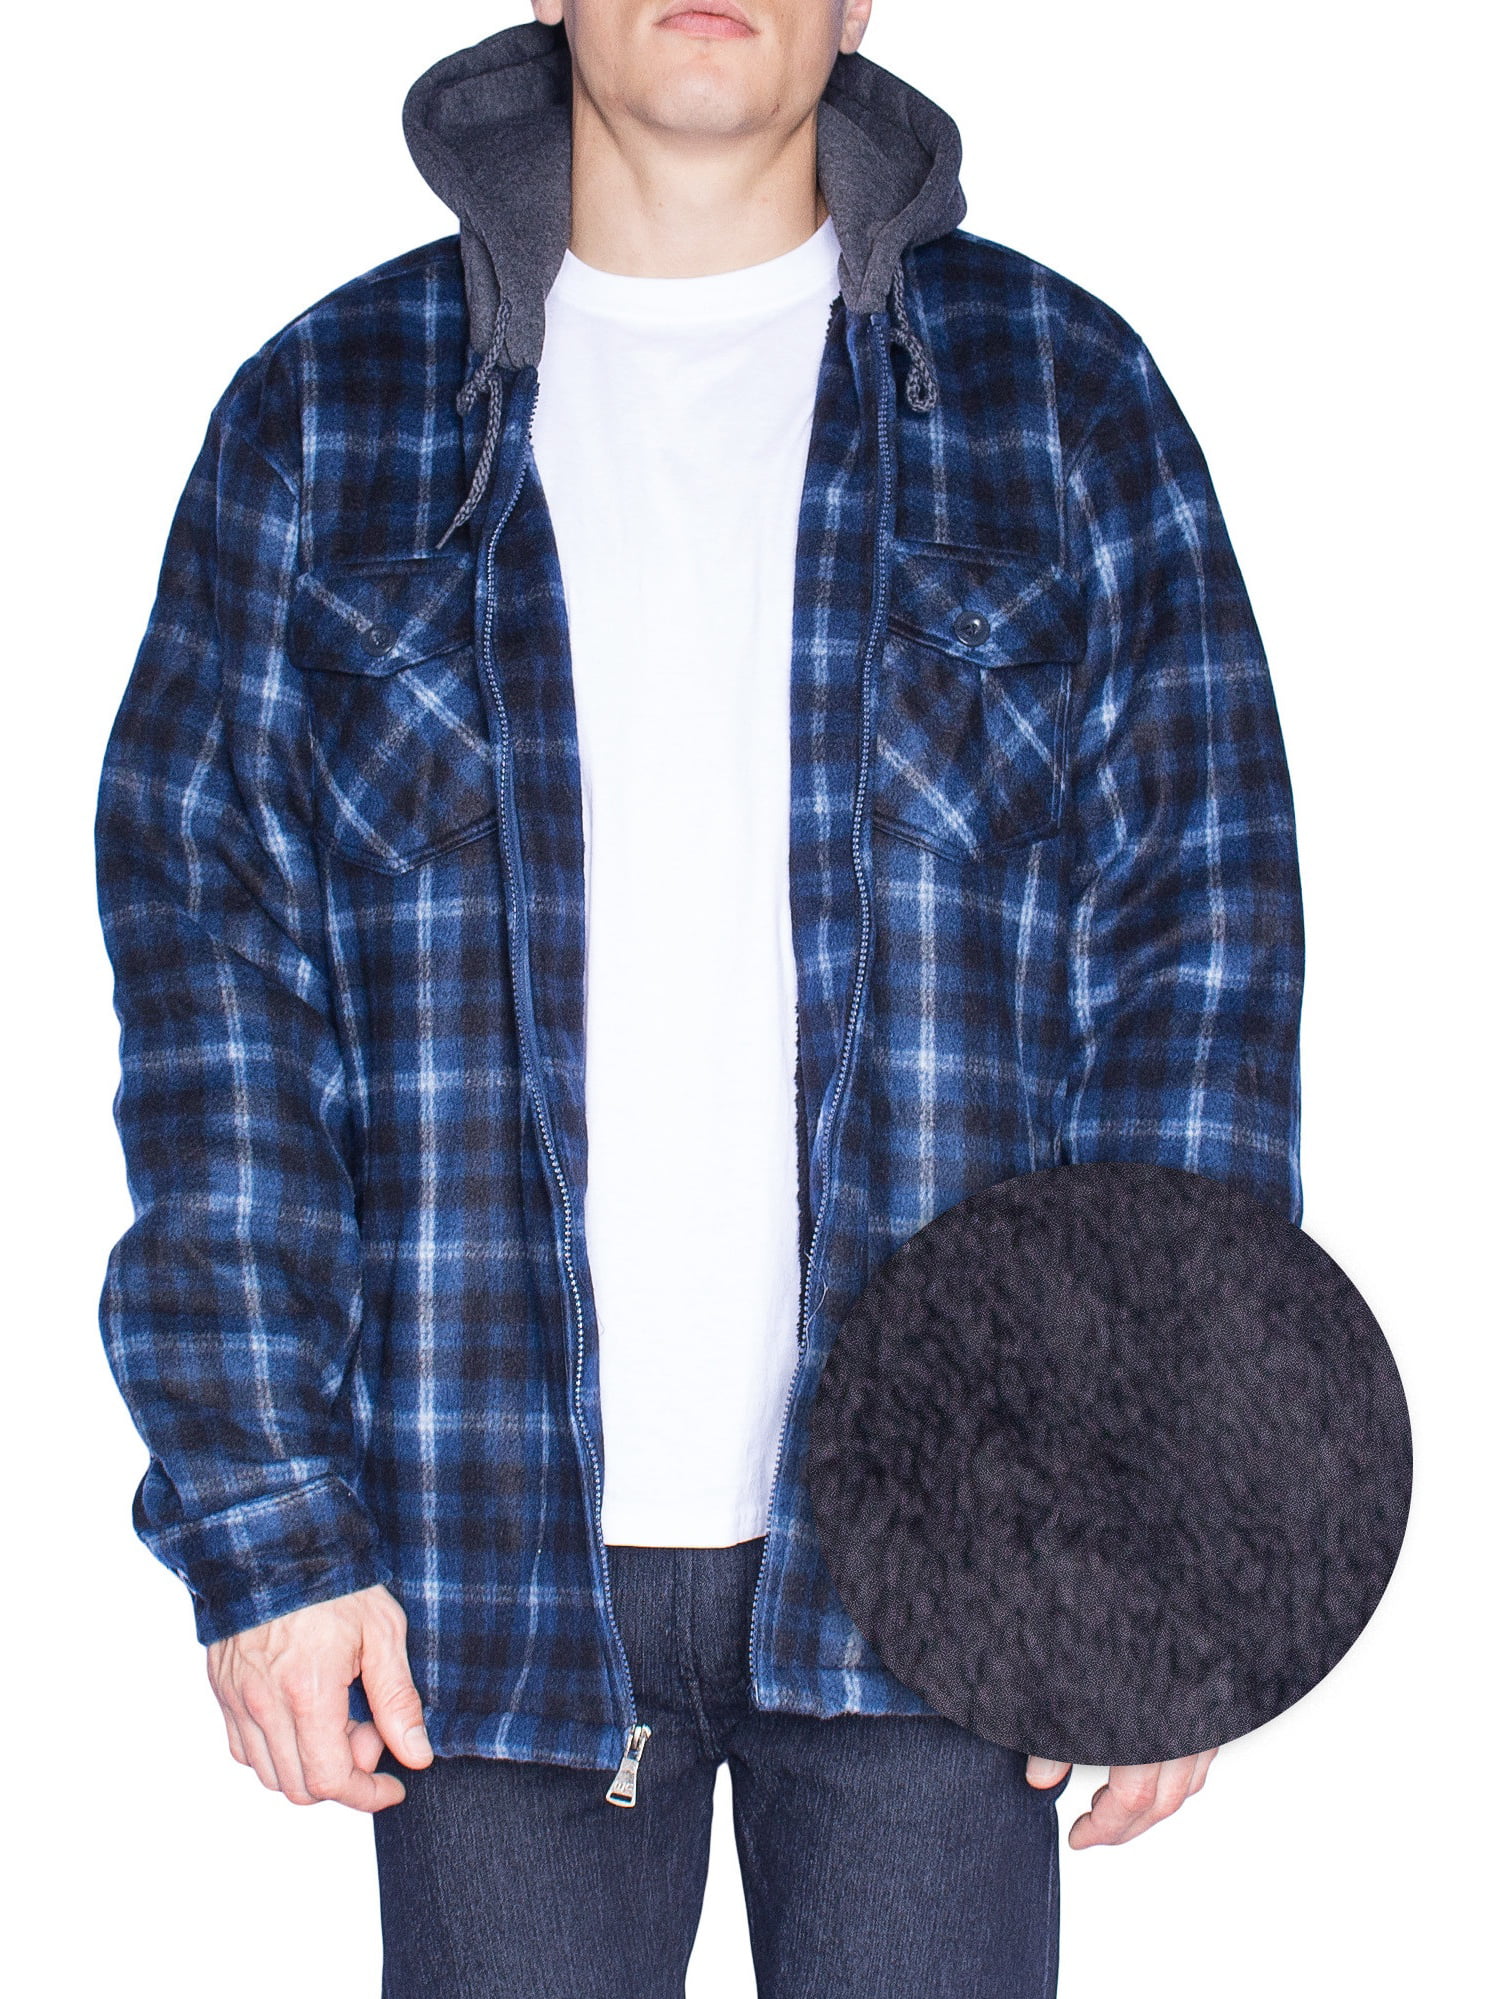 Visive Mens  Flannel  Jackets  For Mens  Fleece  Sherpa Lined  